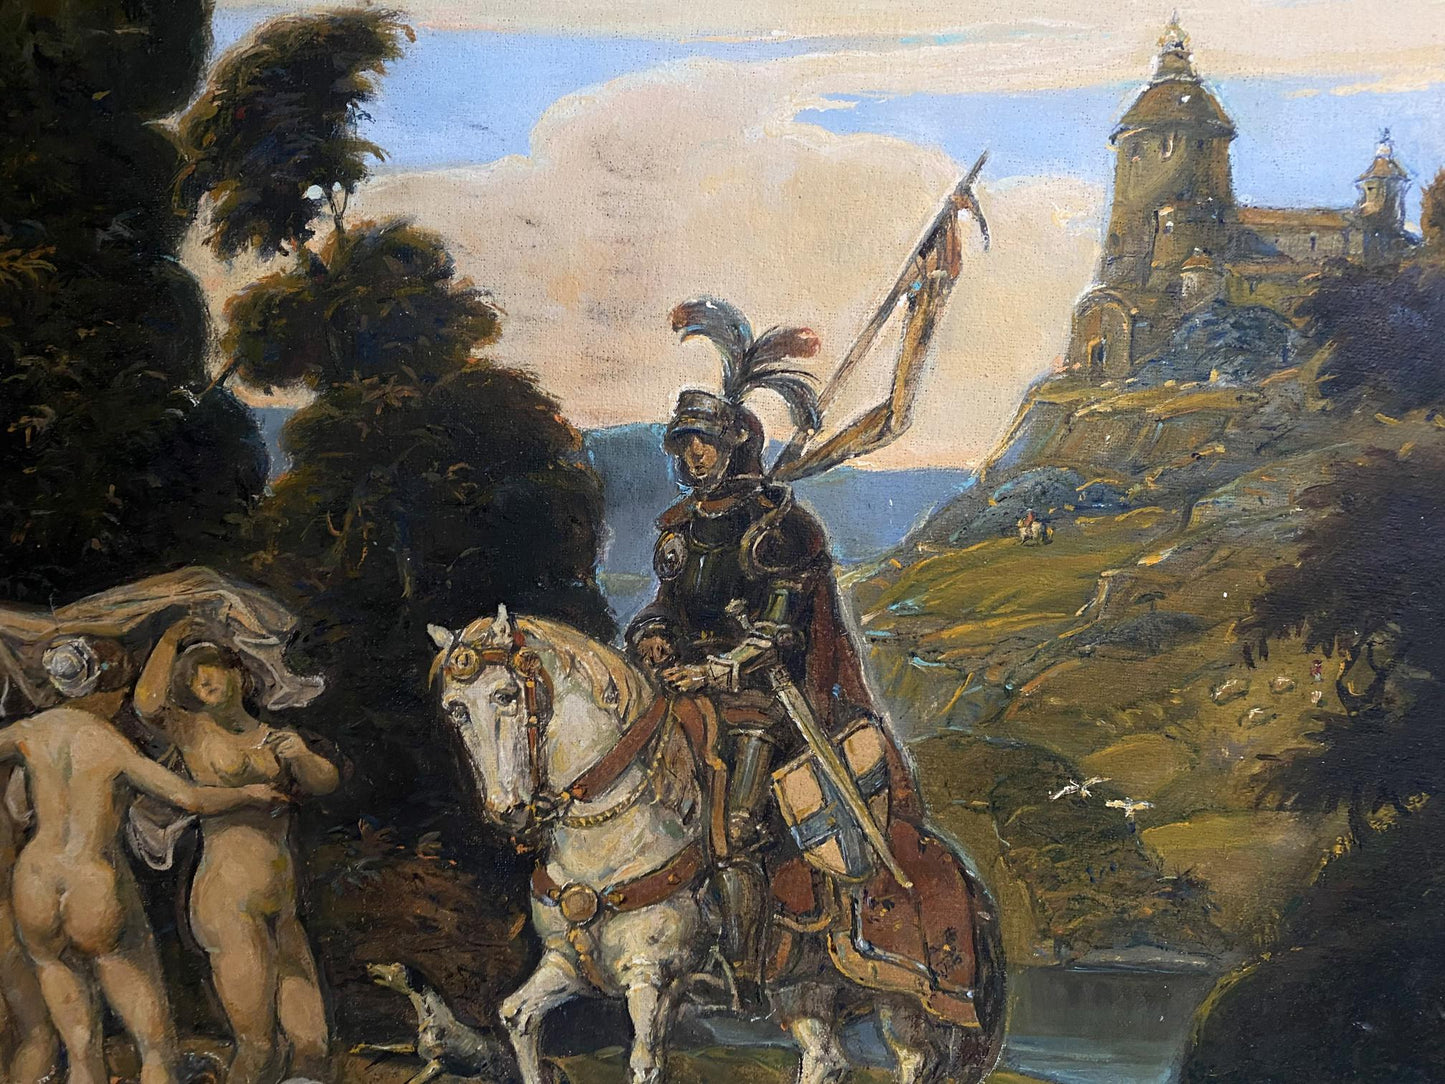 Oleg Arkad'yevich Litvinov's oil painting depicts the journey of a knight